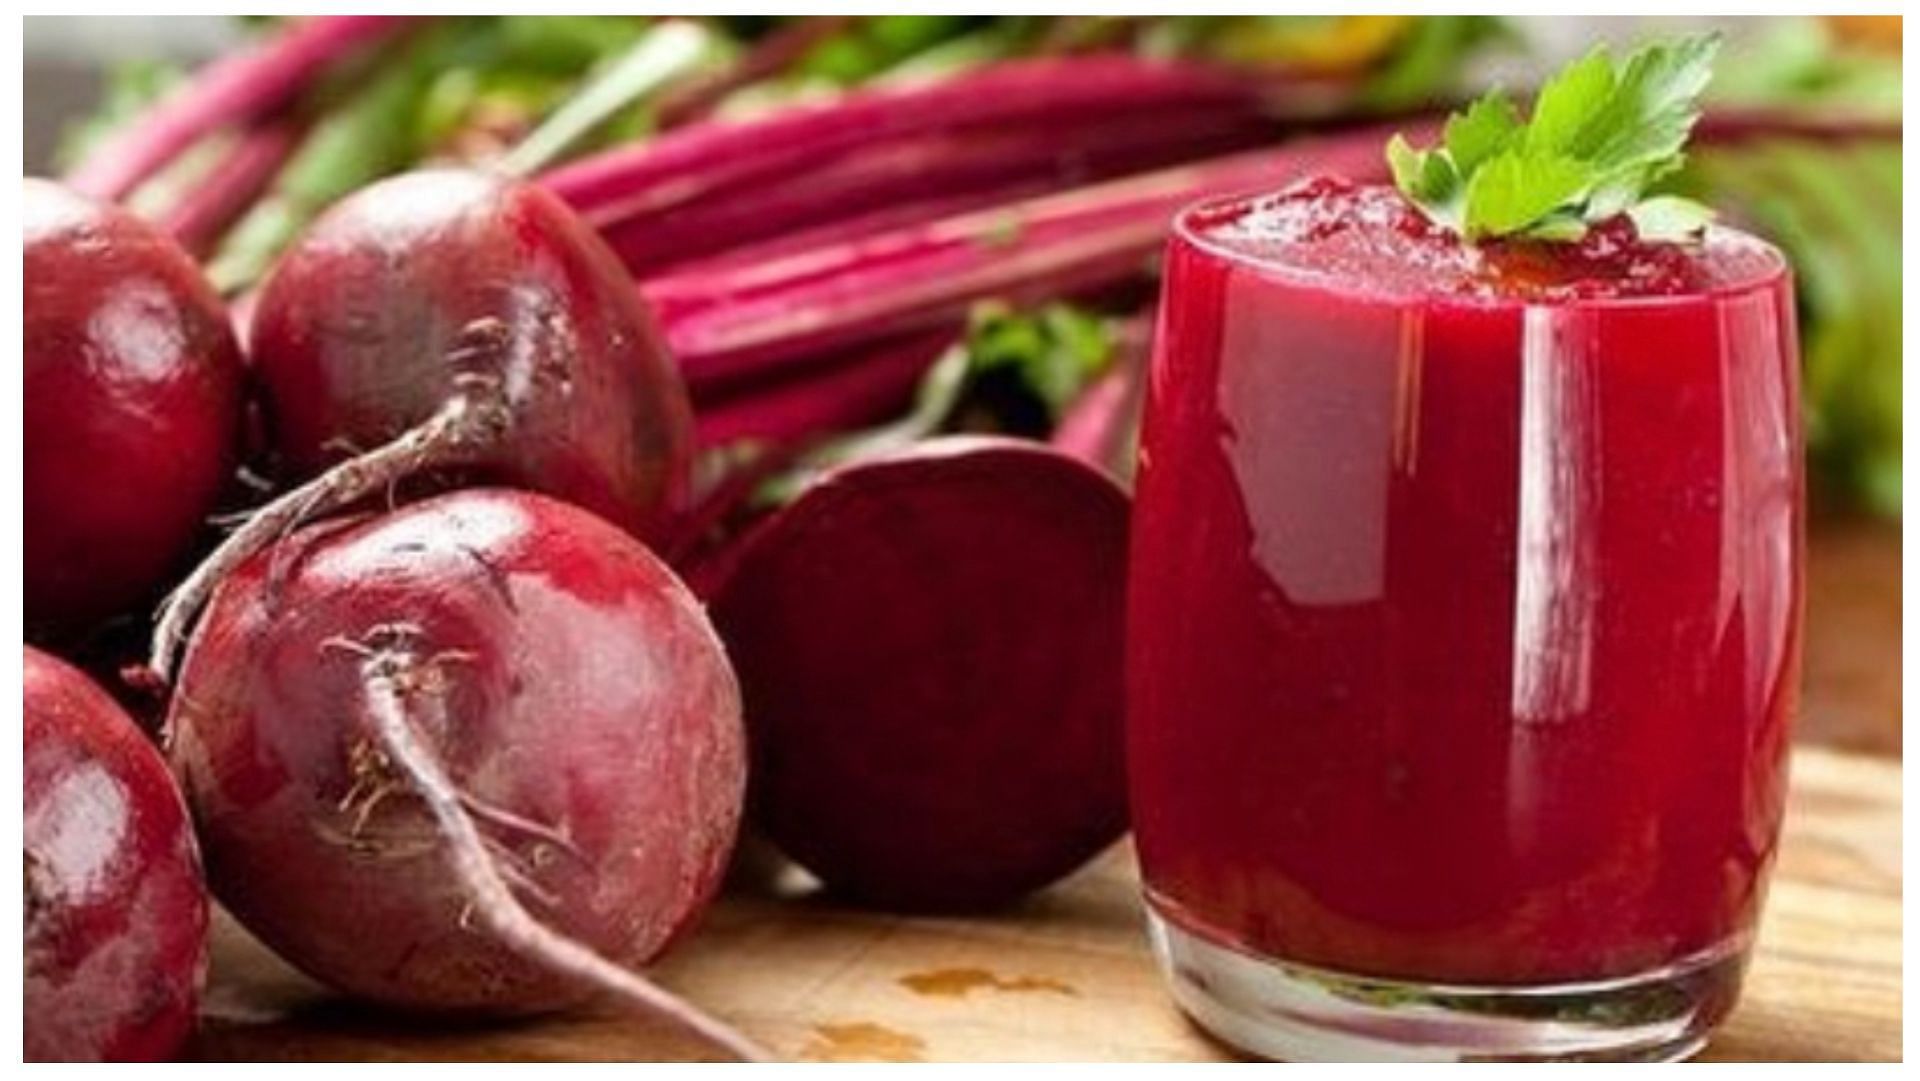 Beet juice is rich in nutrients and offers amazing health benefits. (Image by @dopefitchick via Instagram)